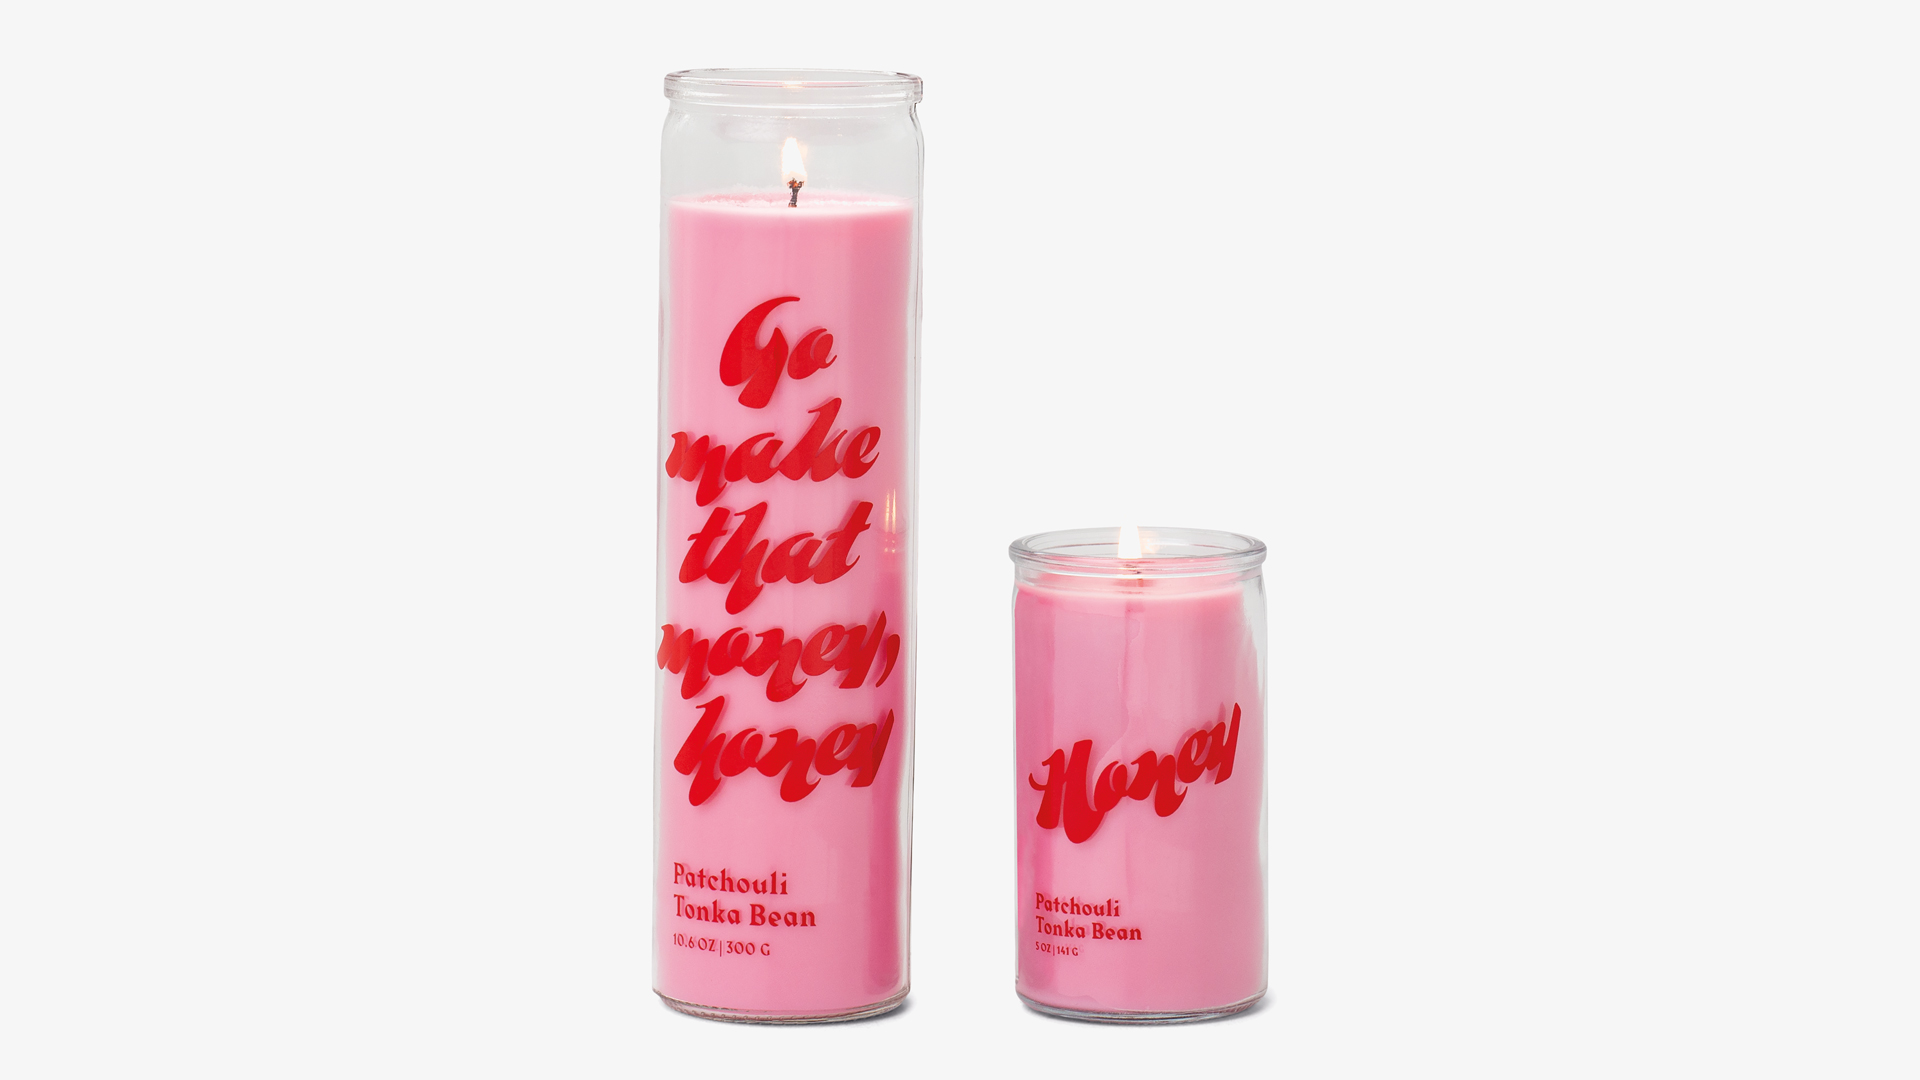 Paddywax "Spark" Candle